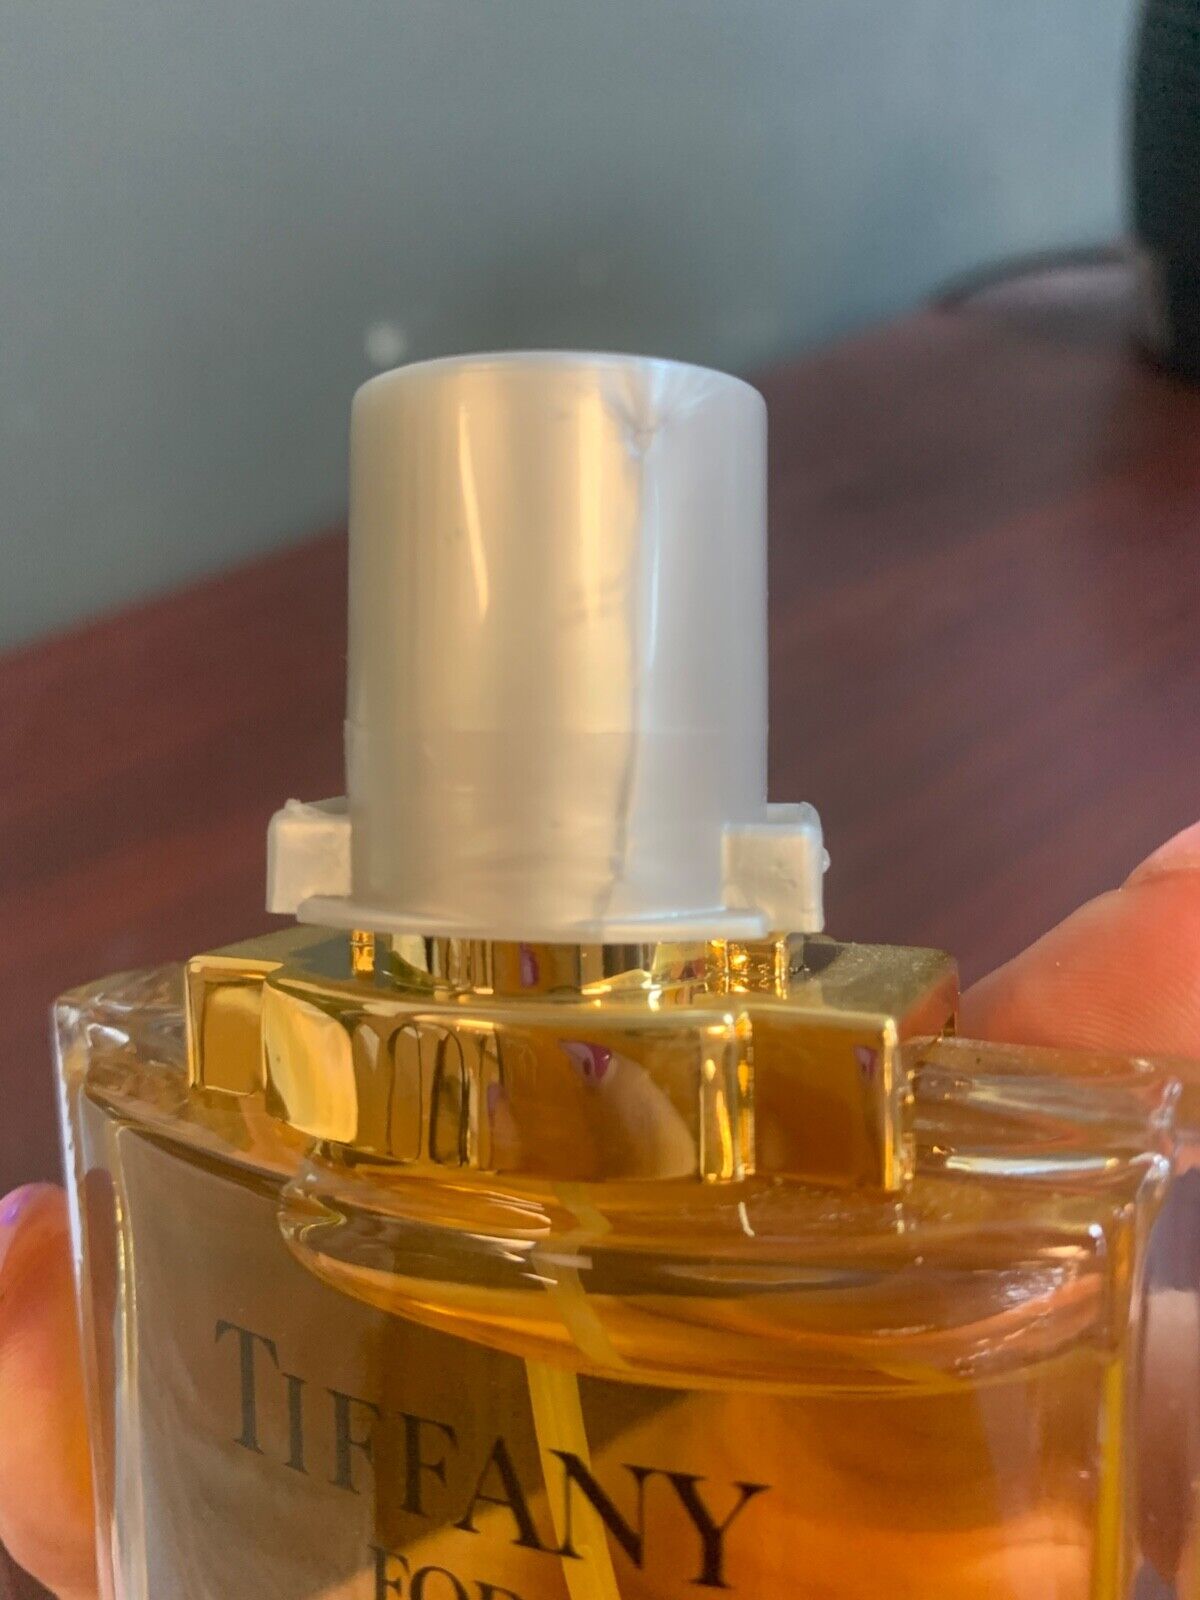 TIFFANY FOR MEN 100ML SPORT COLOGNE SPRAY (NEW WITH BOX)